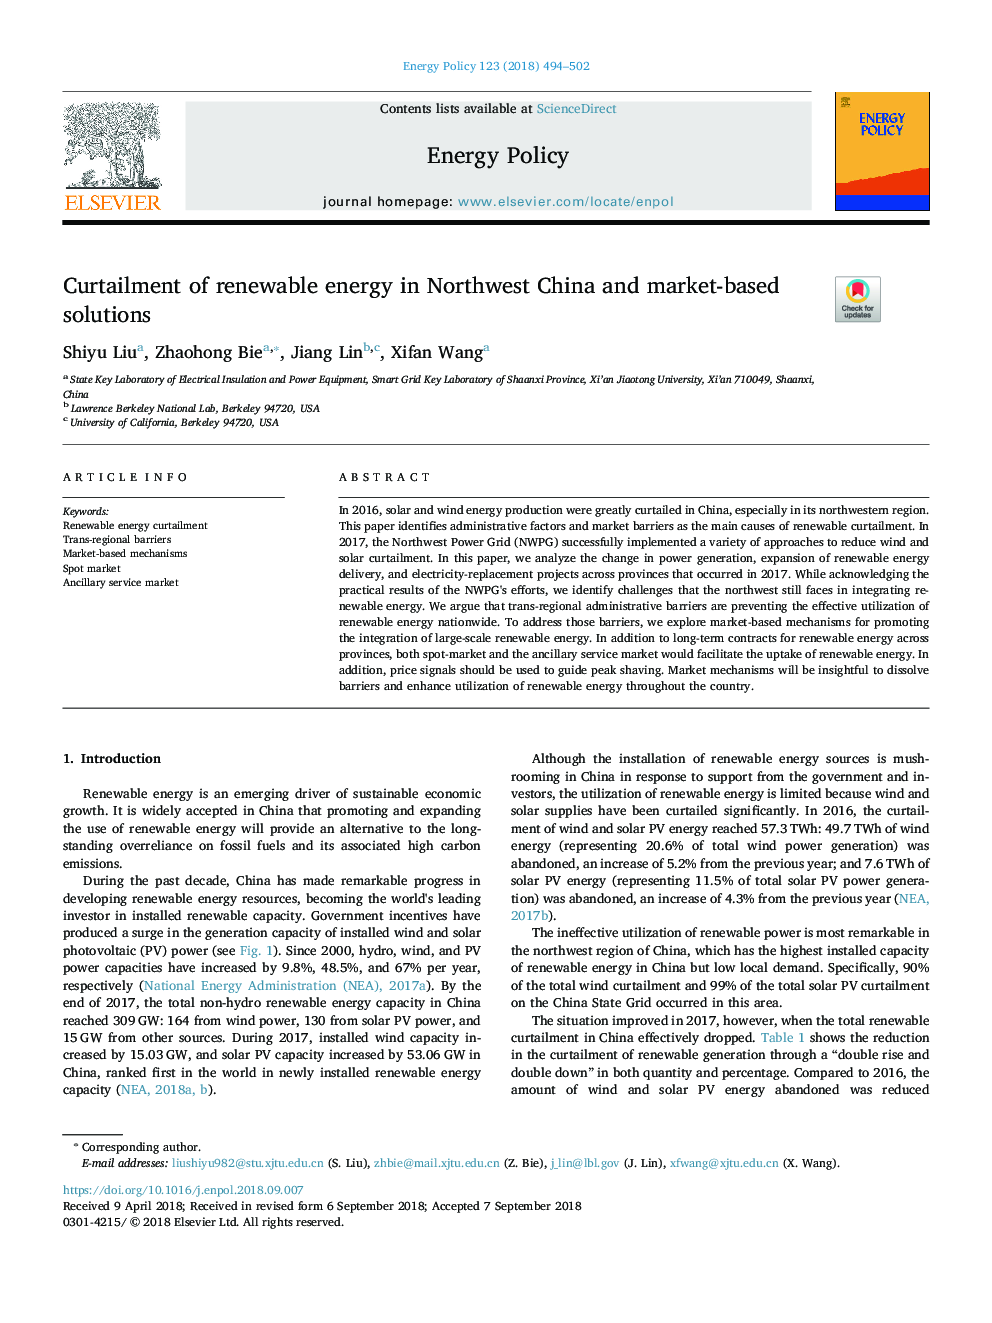 Curtailment of renewable energy in Northwest China and market-based solutions